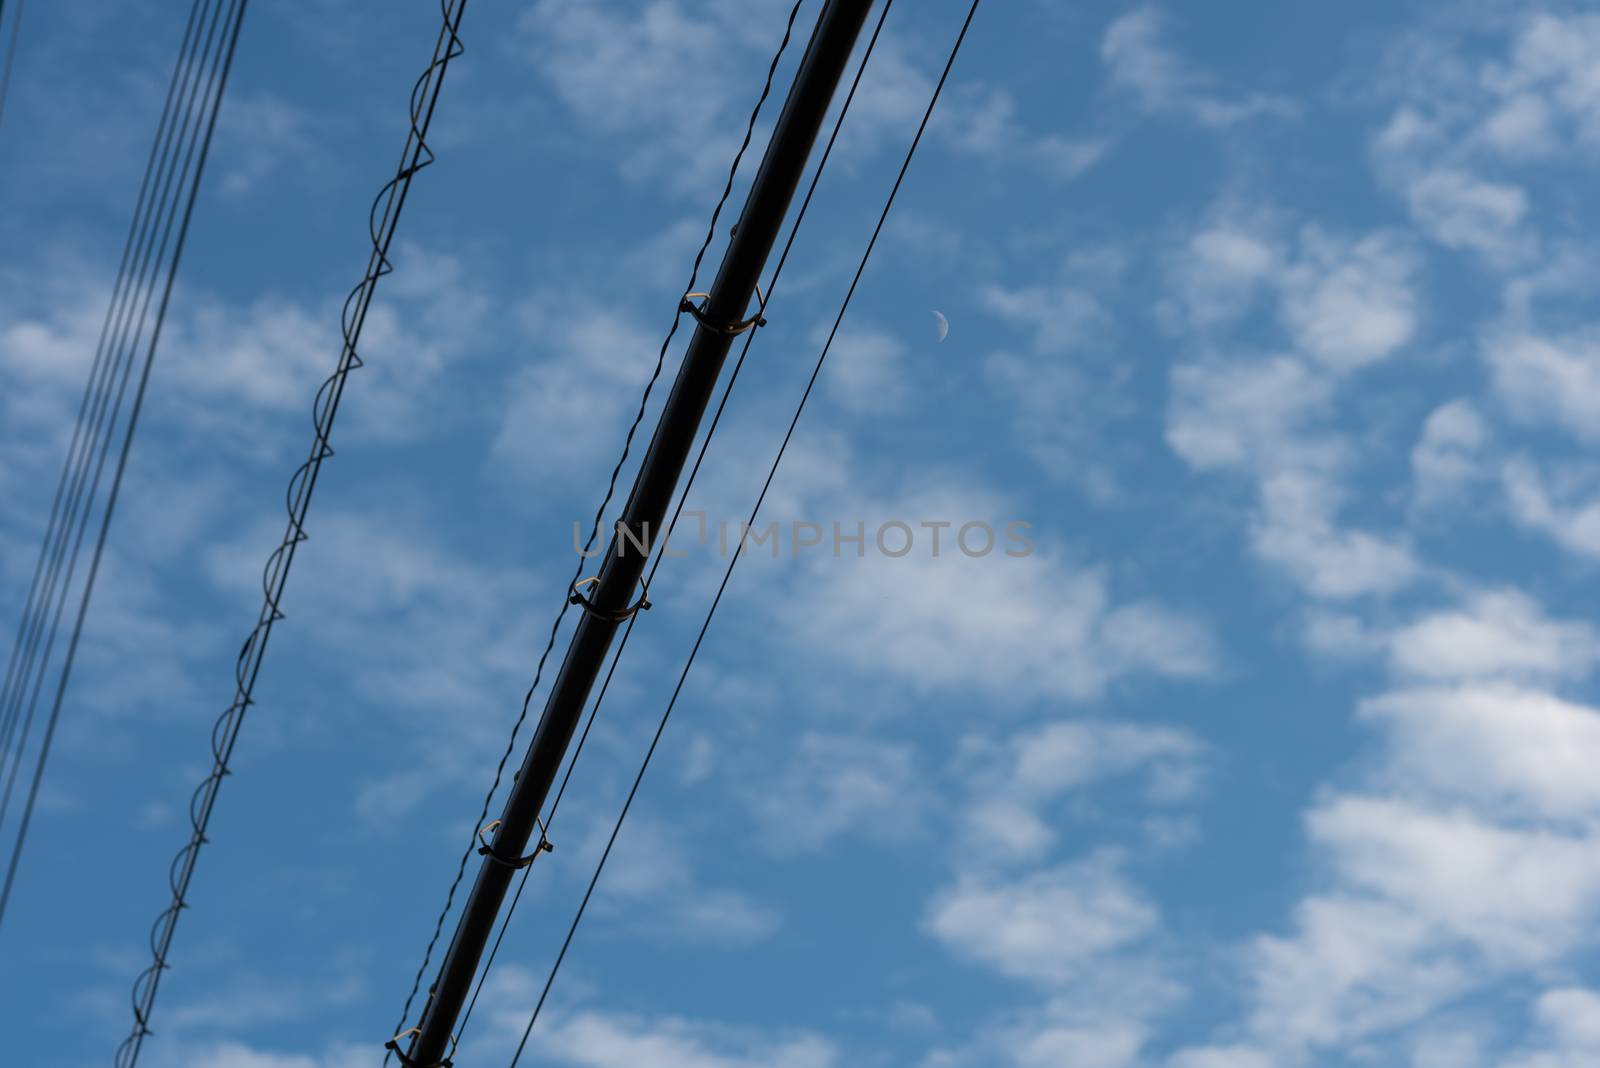 Black Power lines crossing a blue sky dappled with soft clouds and a cresent moon.